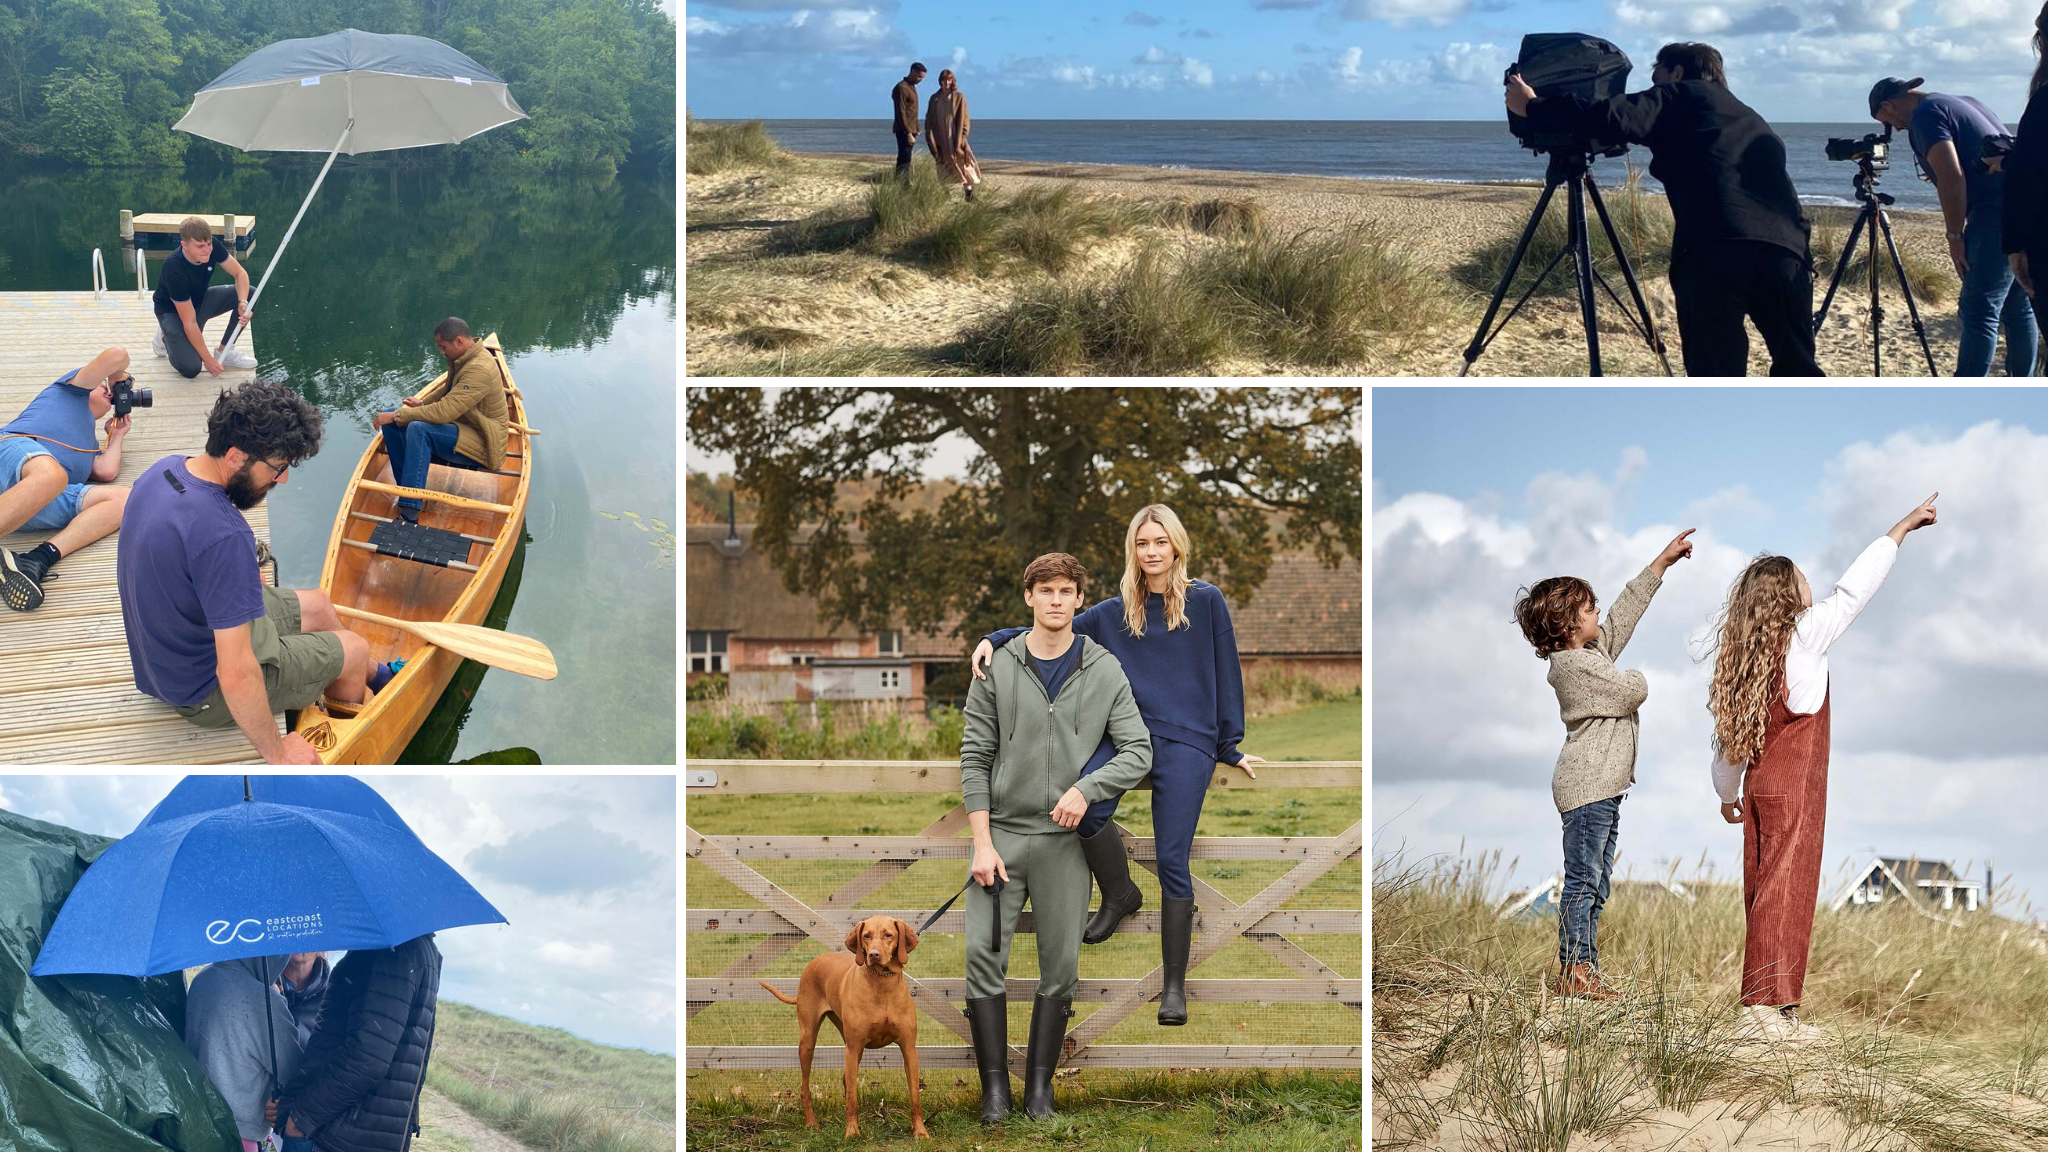 Collage of images of shoot production across Norfolk & Suffolk for fashion & lifestyle brands. Outdoor locations including beaches, fields and lakes.